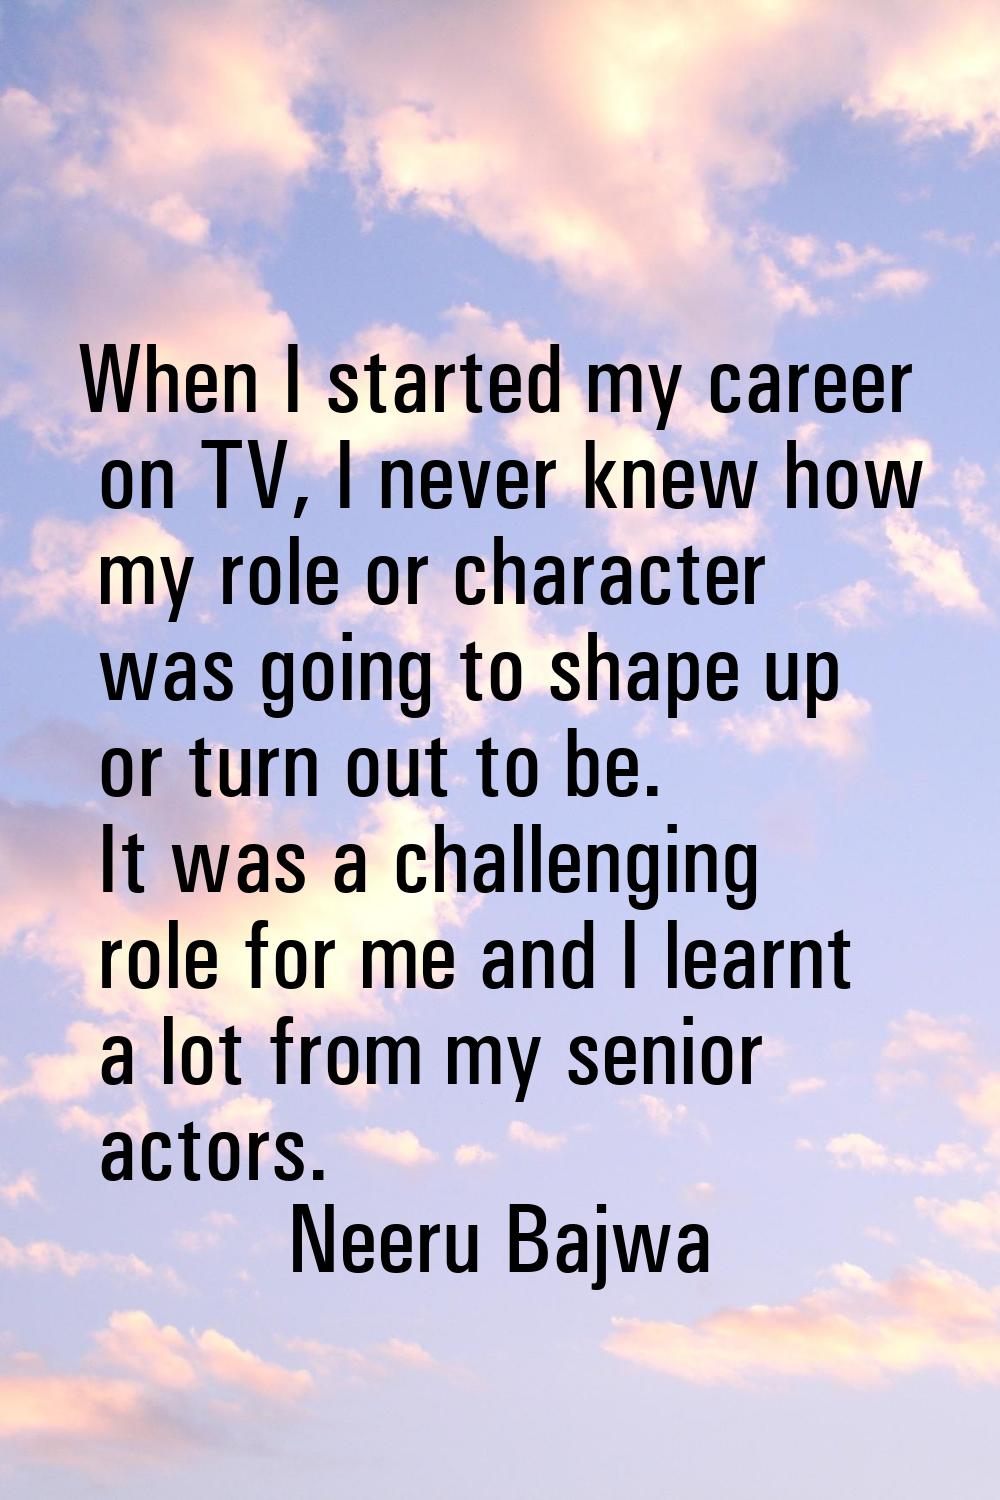 When I started my career on TV, I never knew how my role or character was going to shape up or turn